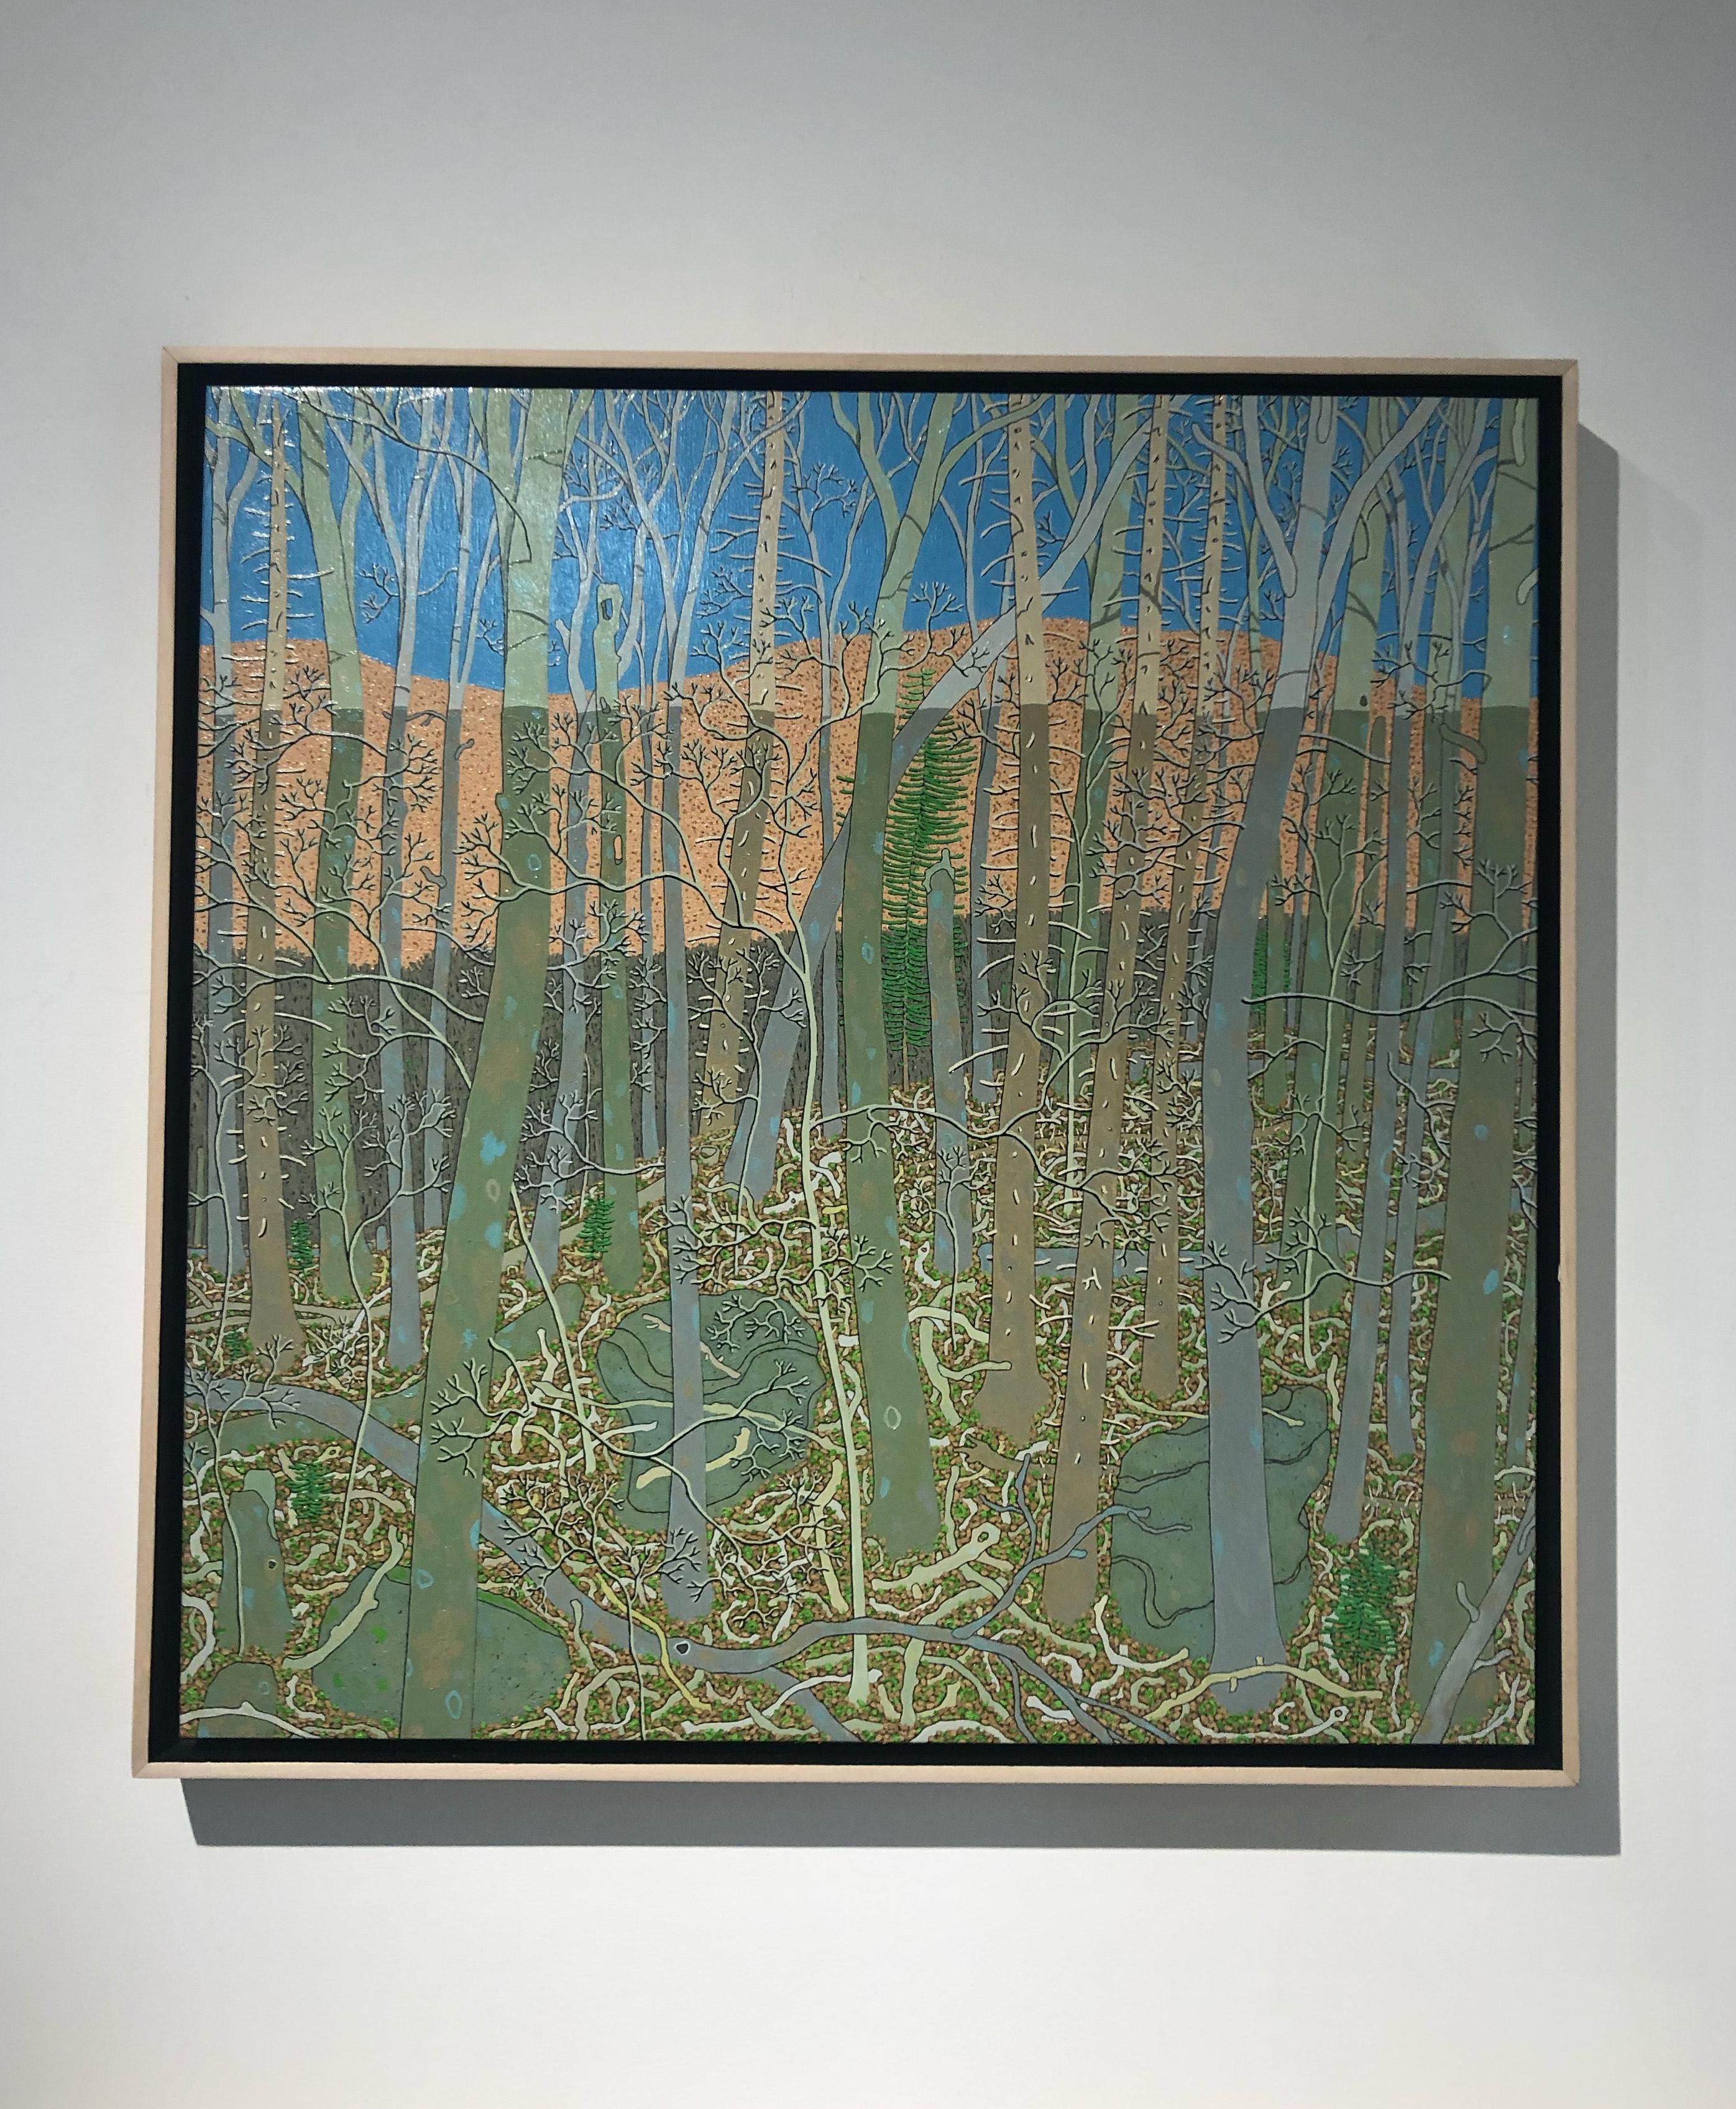 Wyatt Mountain Shadow February, Virginia Forest, Blue, Green, Gray, Salmon Peach - Painting by Gregory Hennen